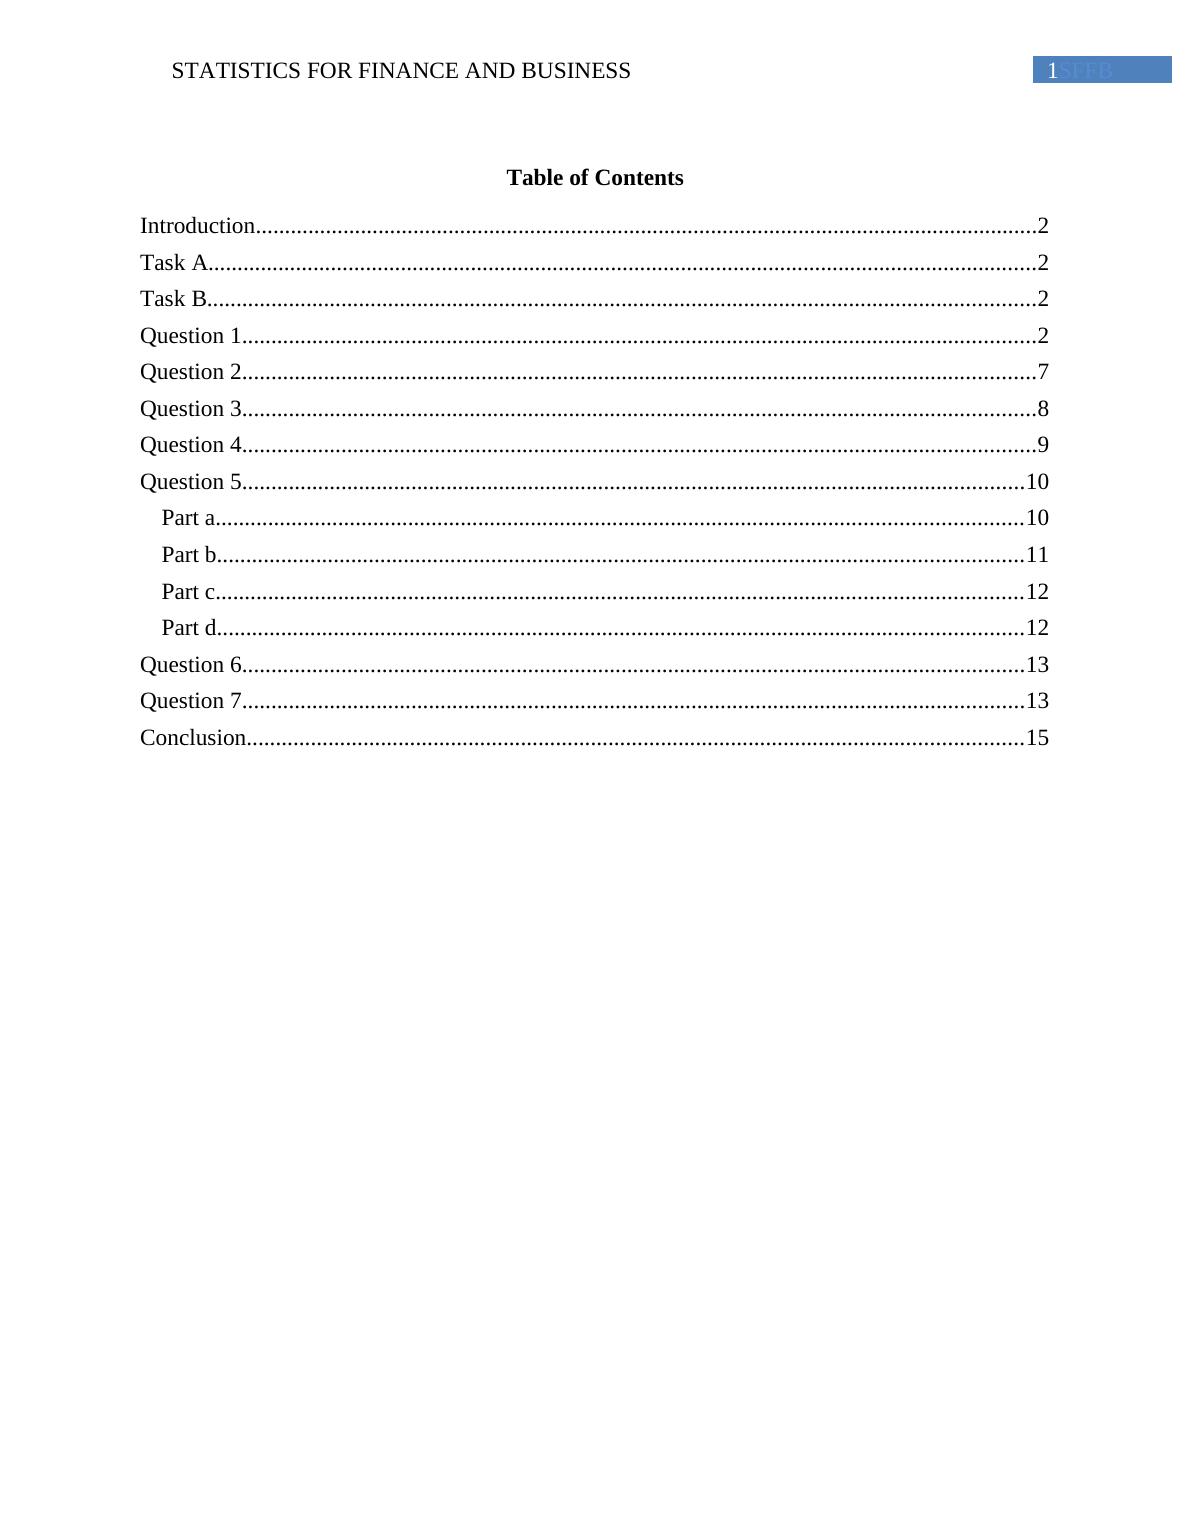 Statistics for Business and Financial (pdf)_2